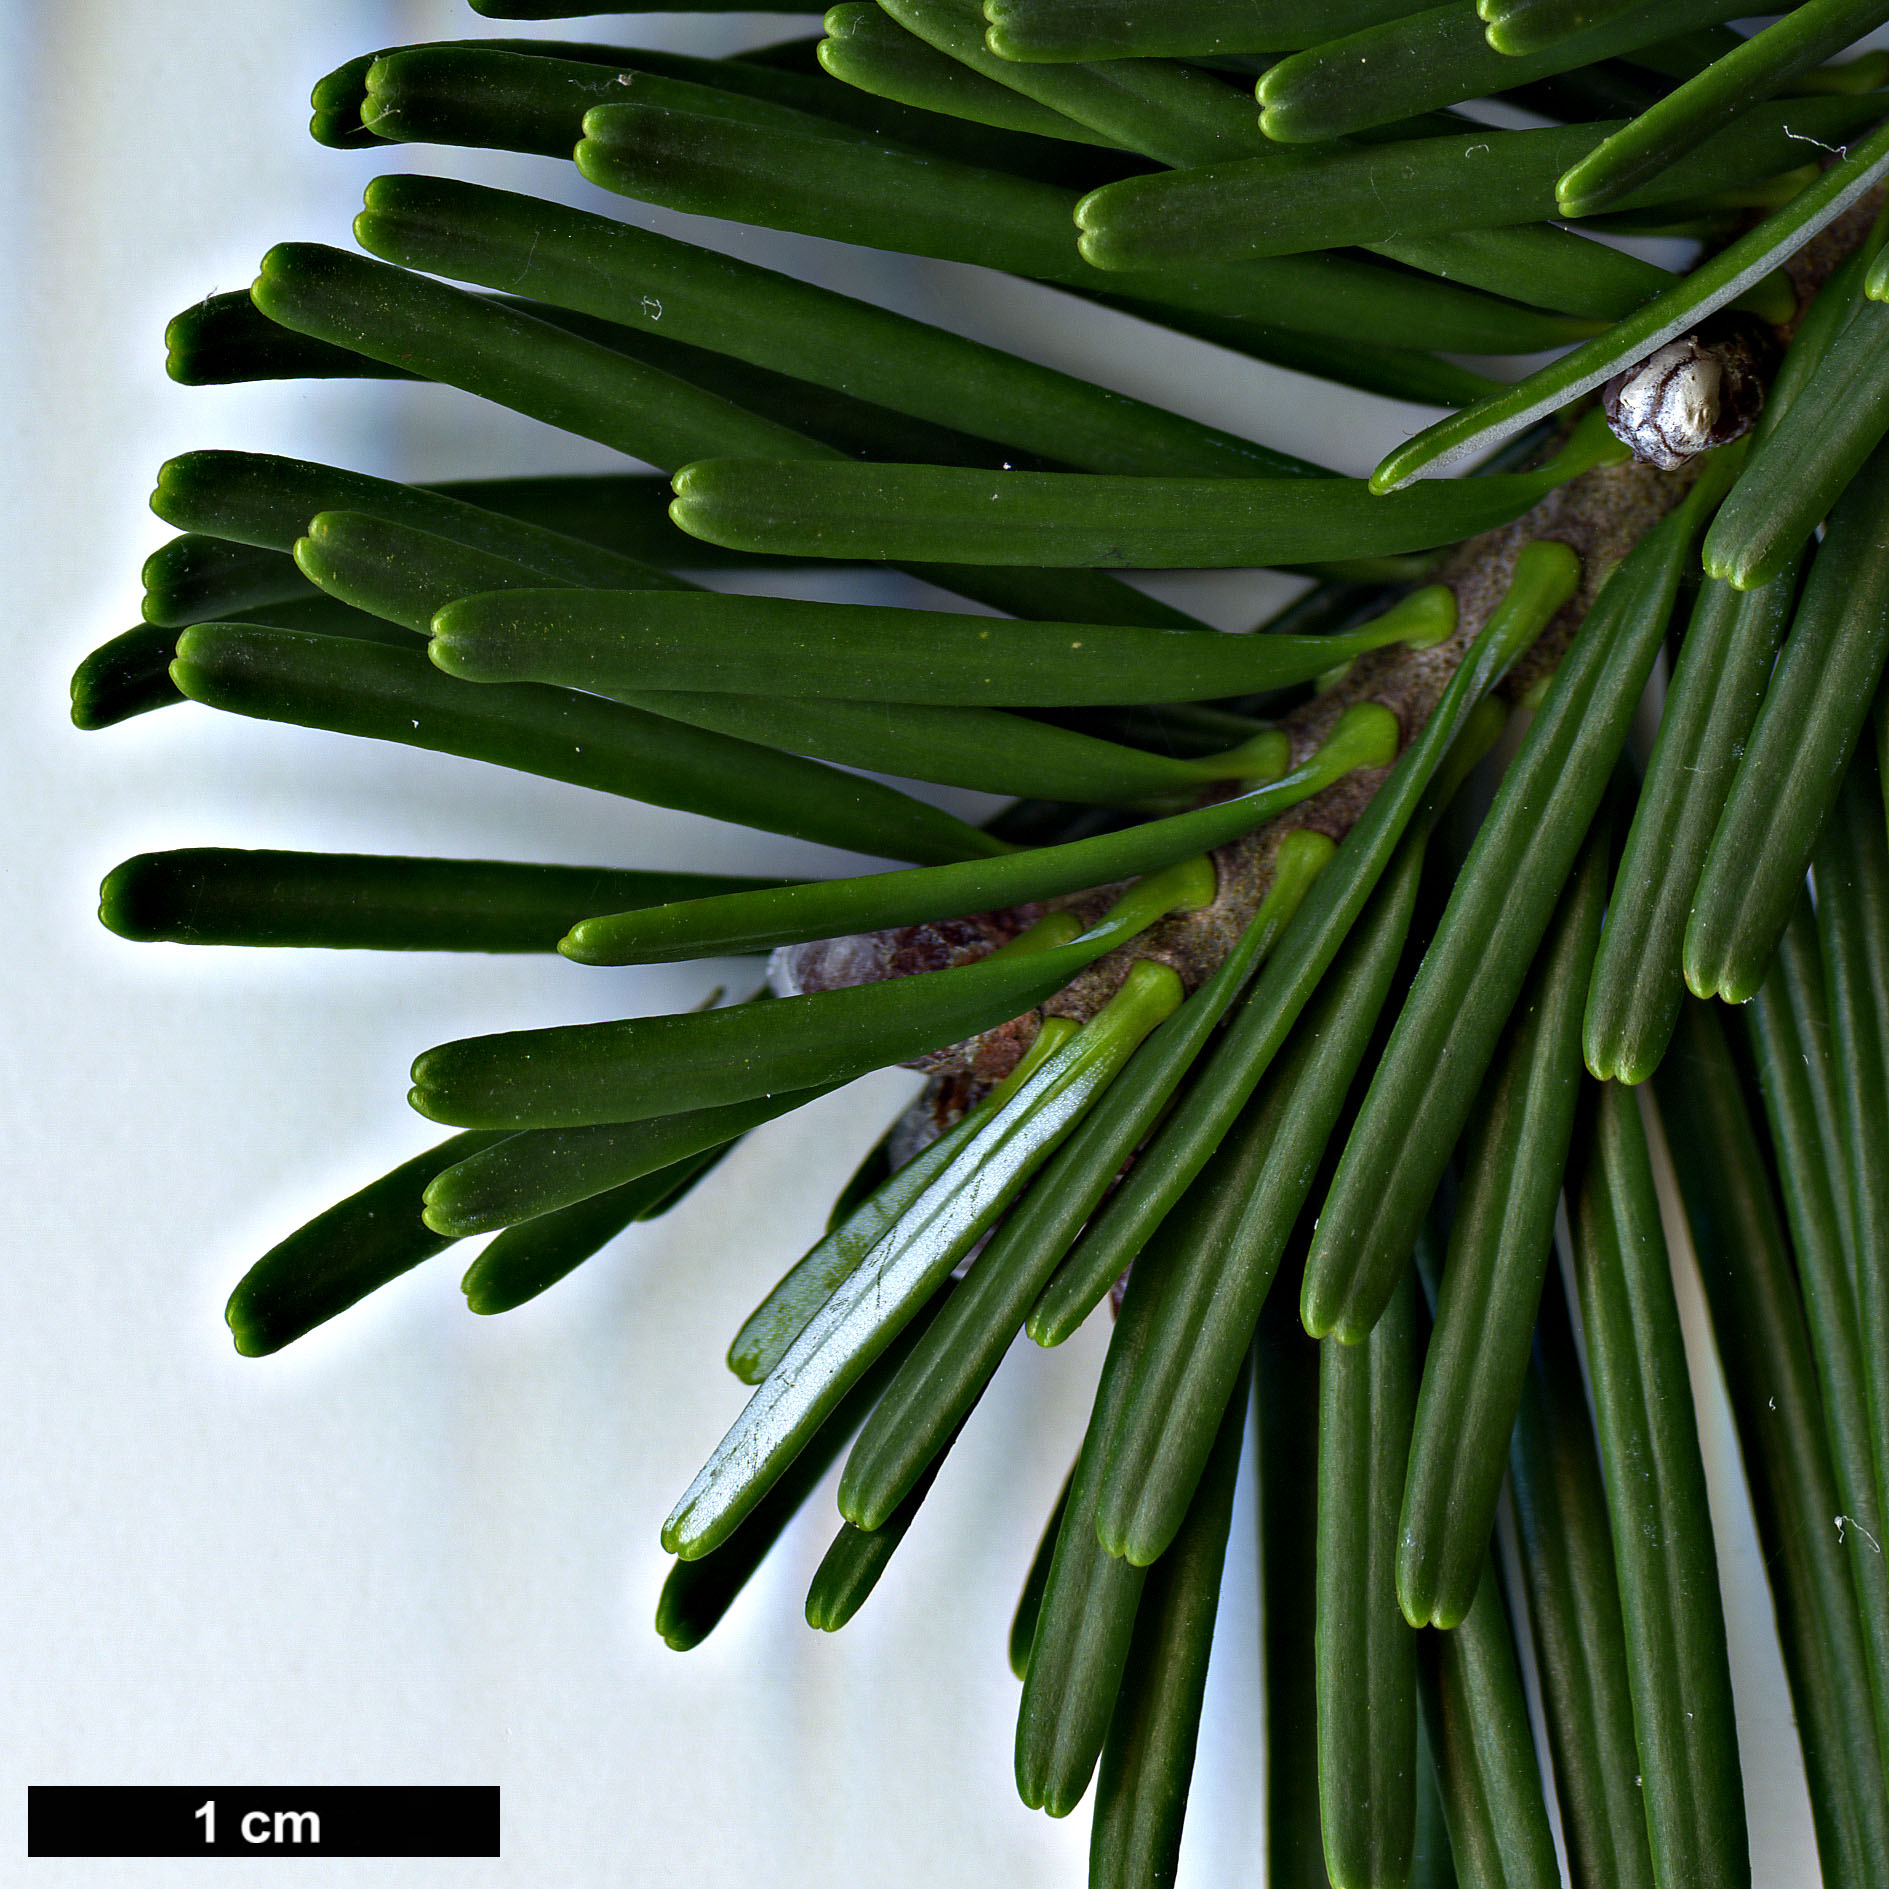 High resolution image: Family: Pinaceae - Genus: Abies - Taxon: veitchii